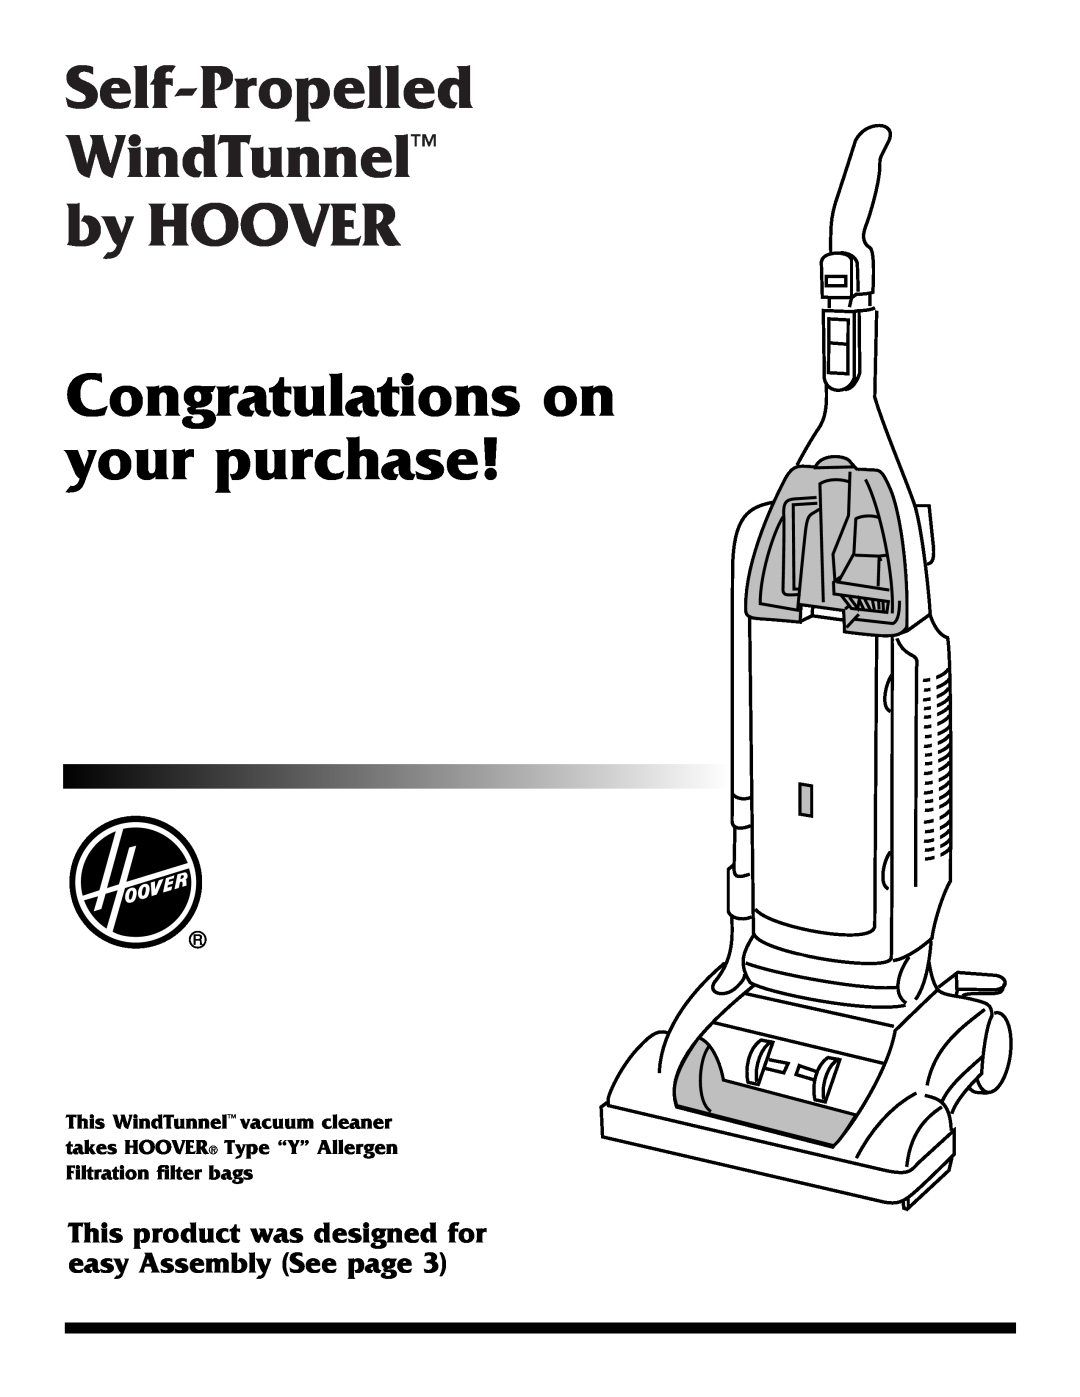 Hoover Self-Propelled WindTunnel Cleaner manual Self-Propelled WindTunnel by HOOVER Congratulations on your purchase 